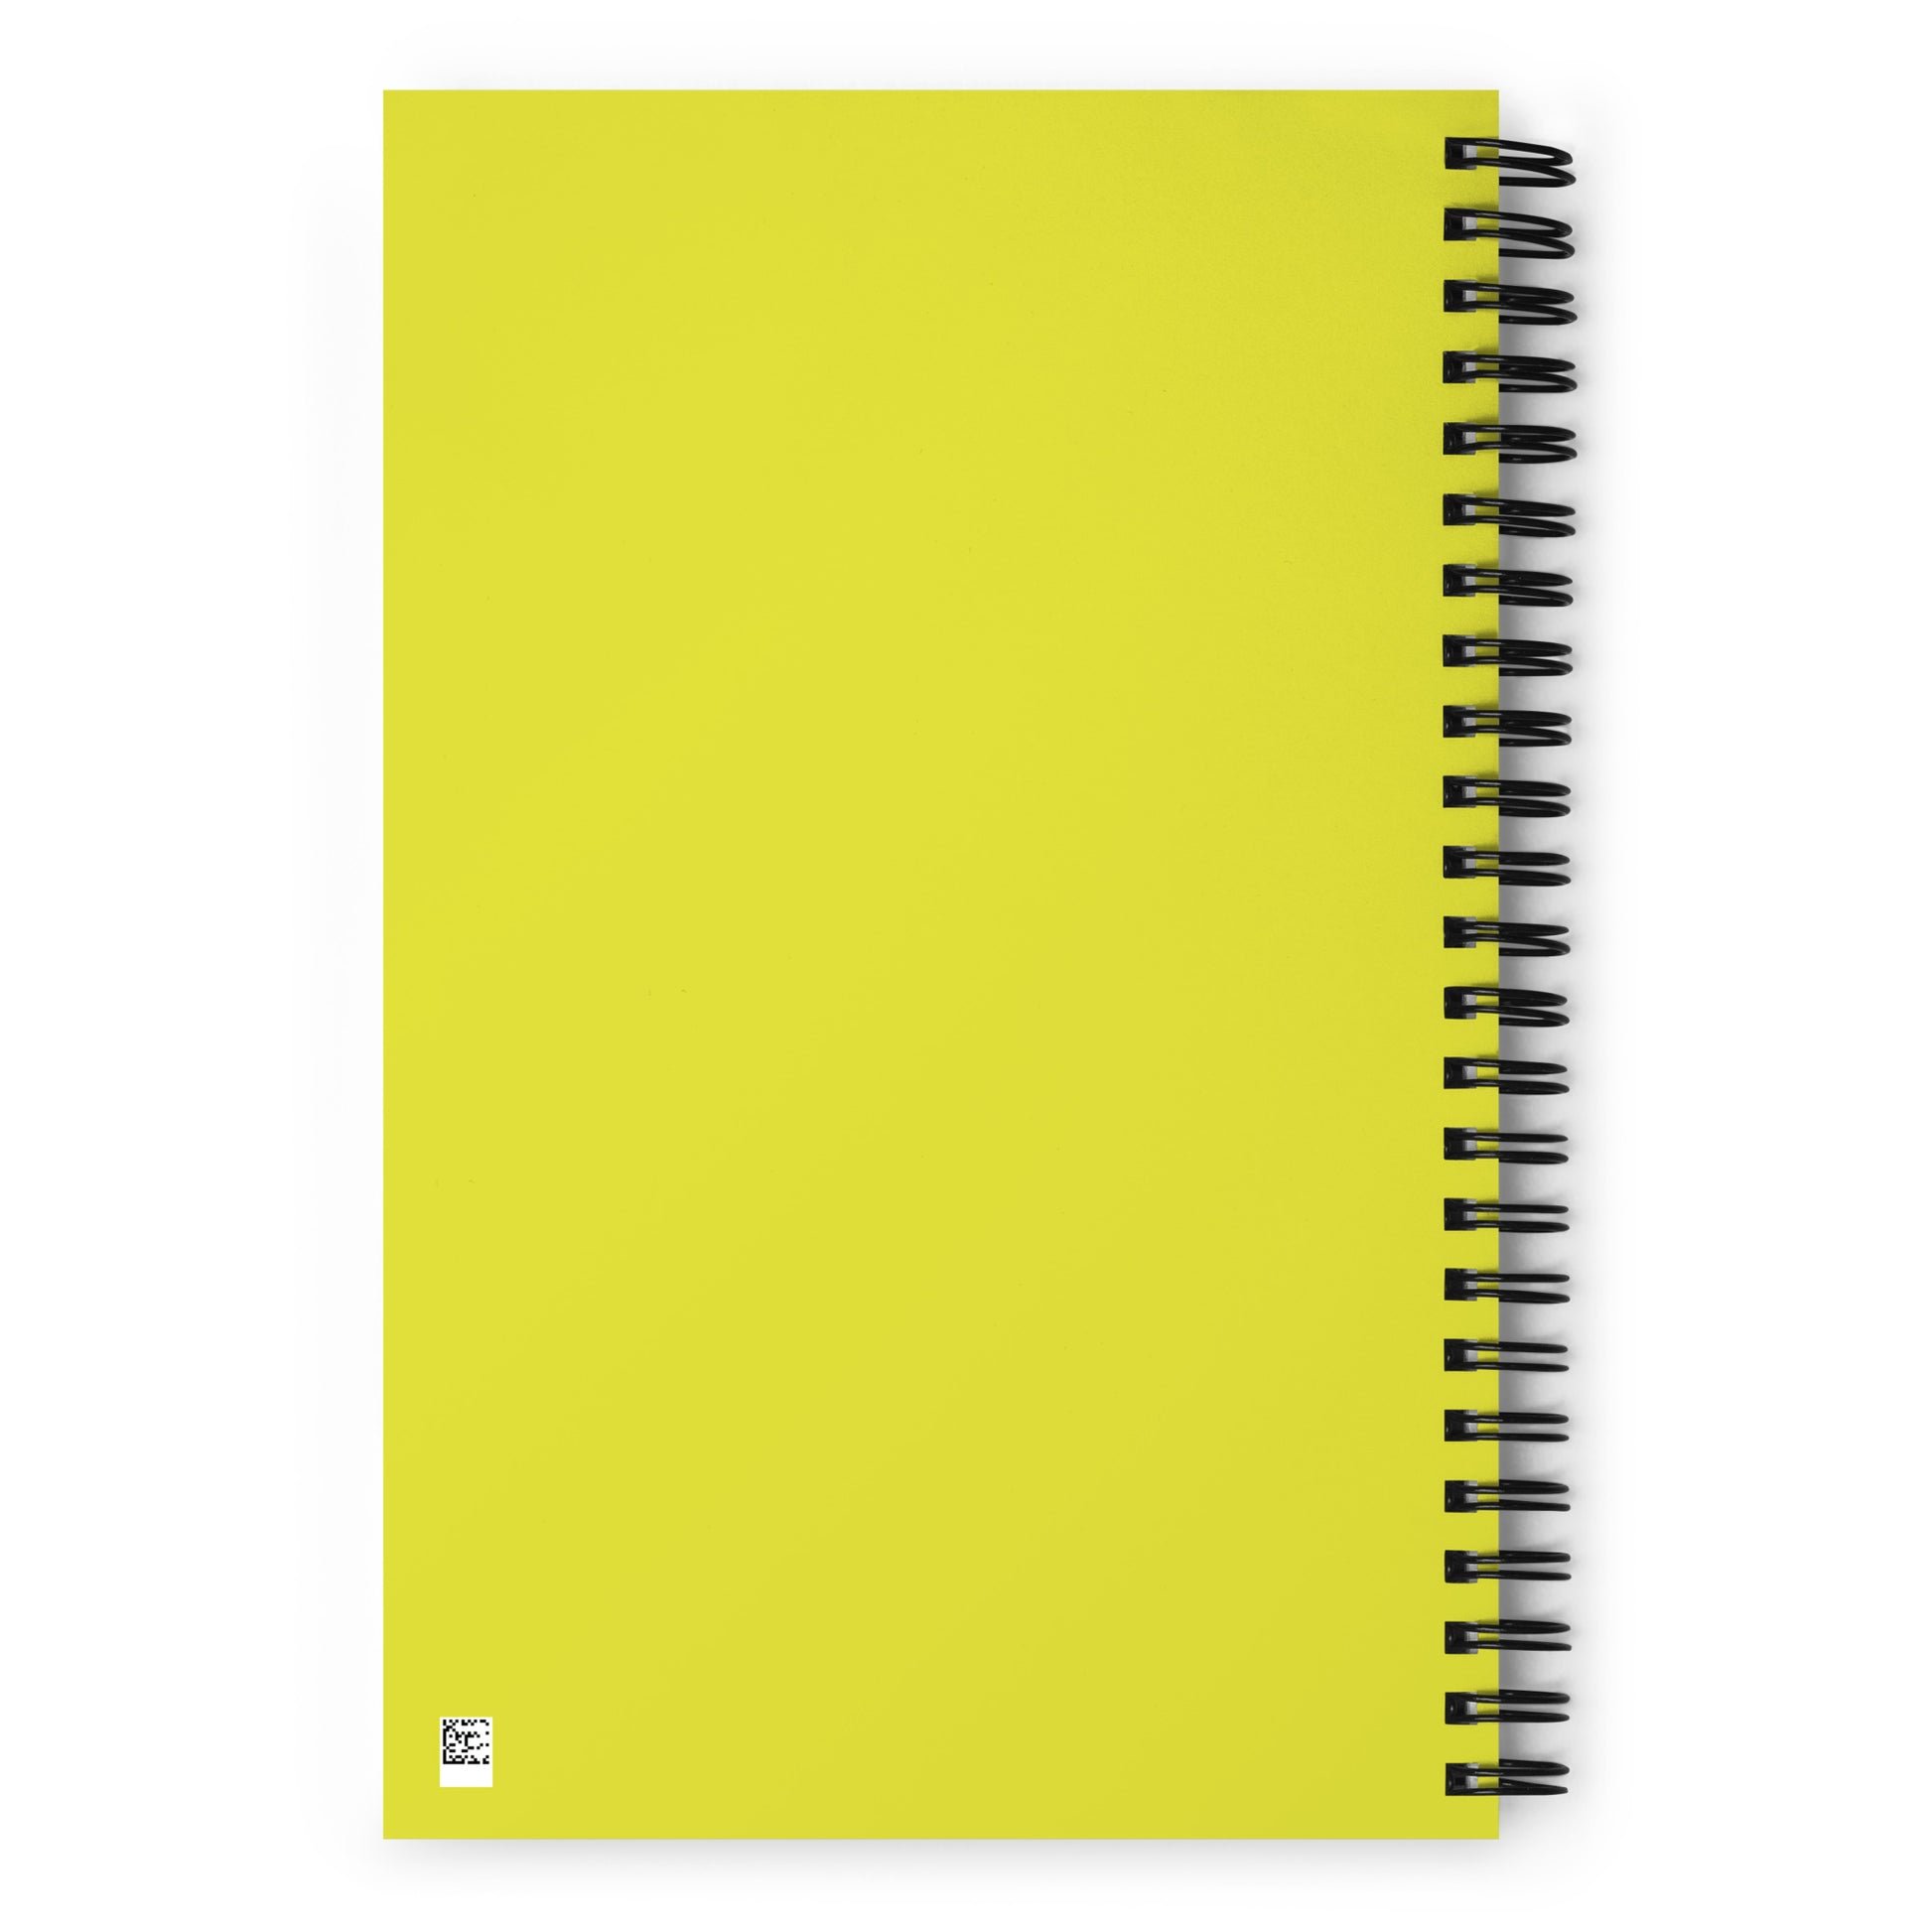 Aviation Gift Spiral Notebook - Yellow • YQY Sydney • YHM Designs - Image 02